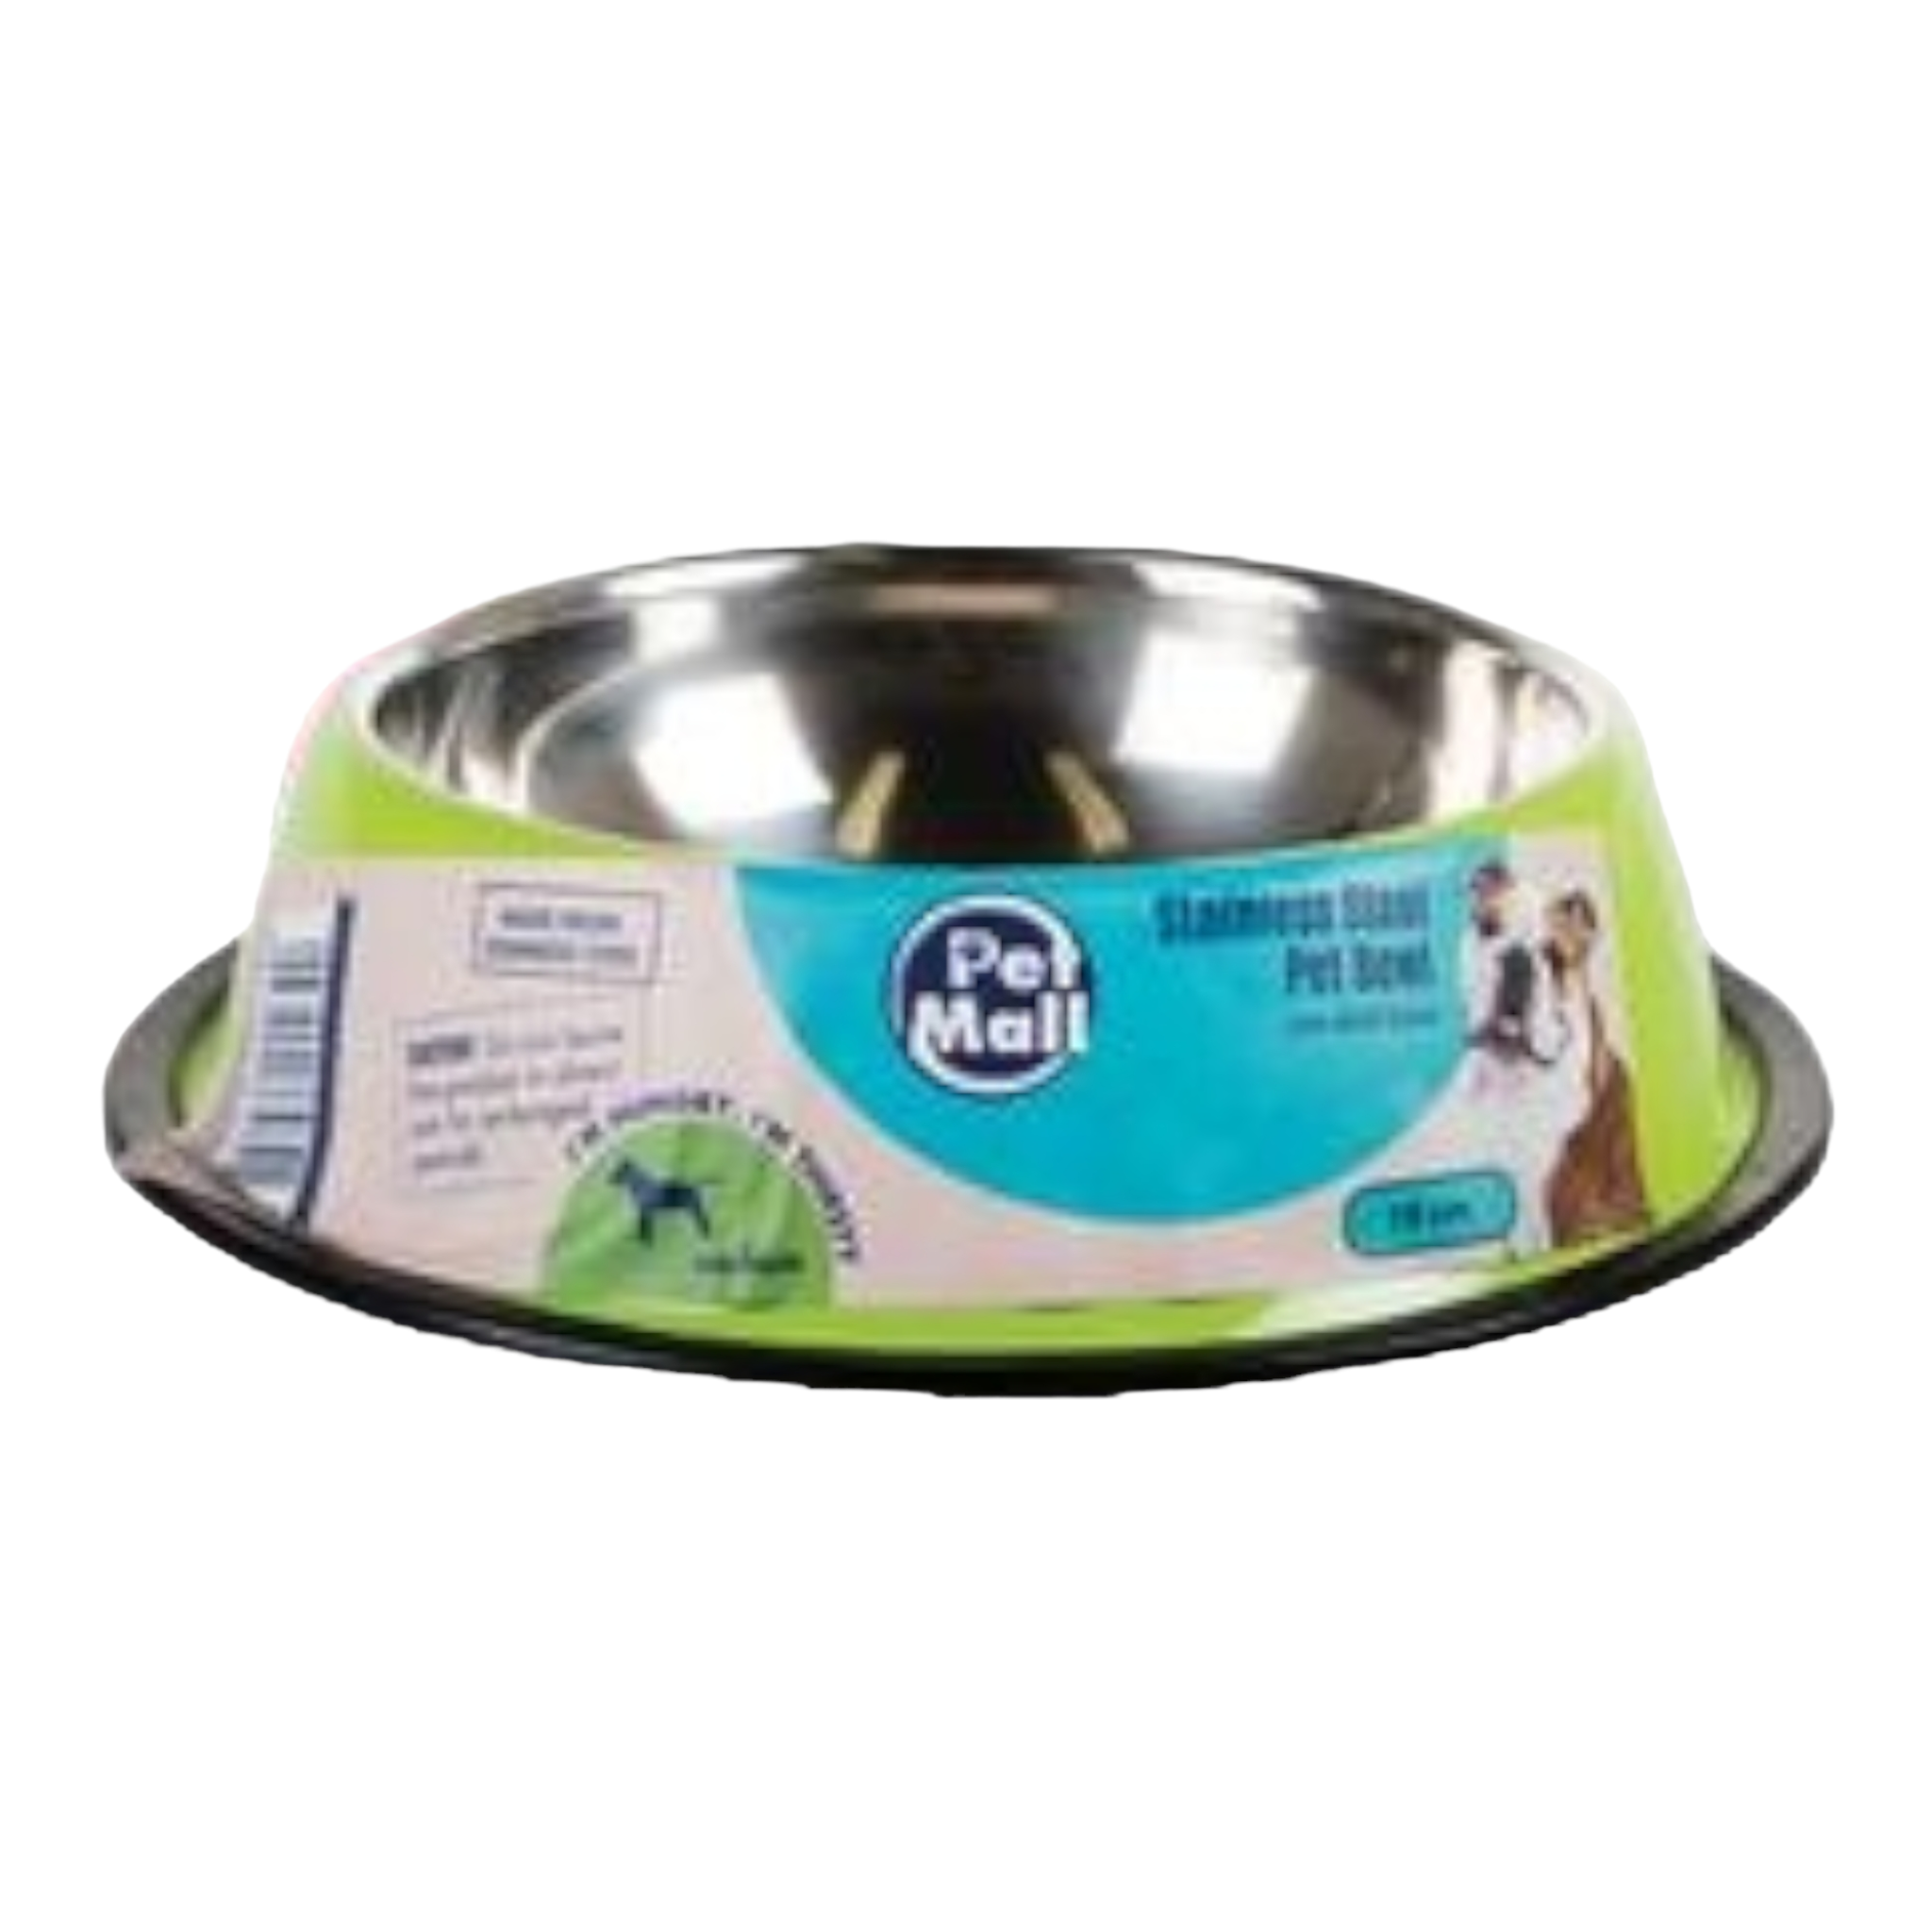 Pet Mall Dog/Cat Bowl 18cm Stainless Steel 1pc